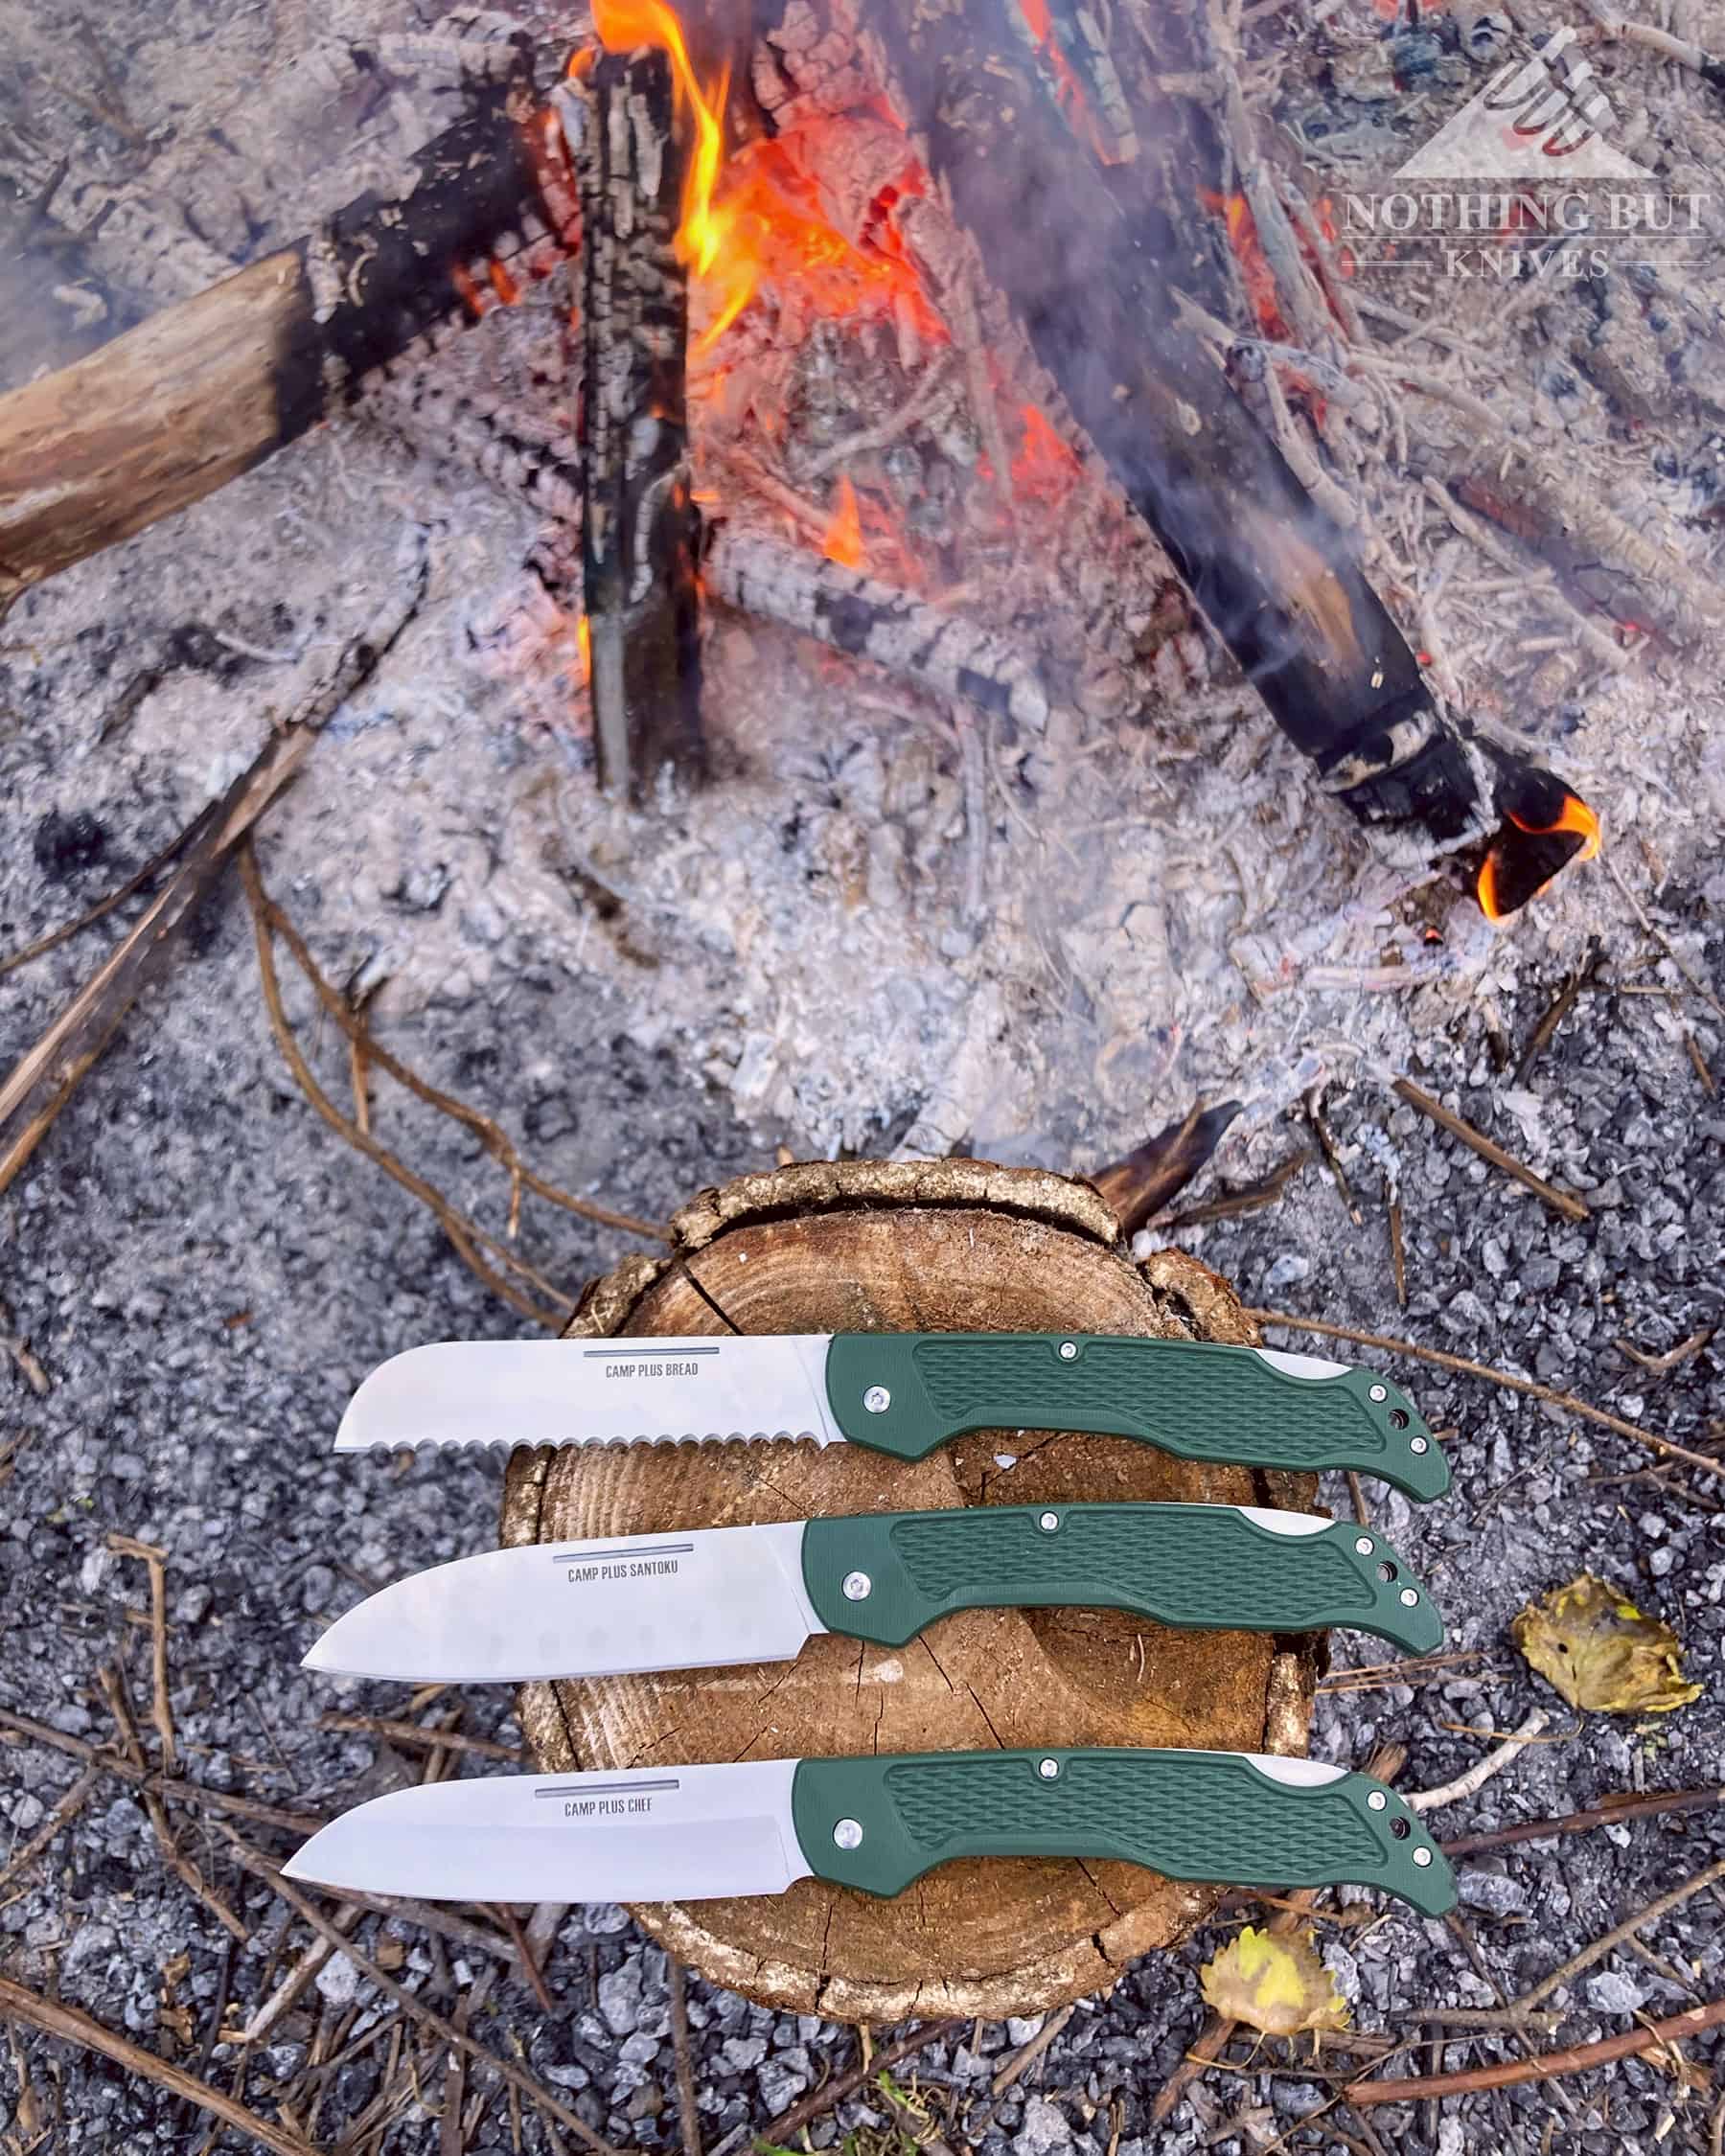 The Ontario Knife Company Camping Folders next to a campfire in the open position.